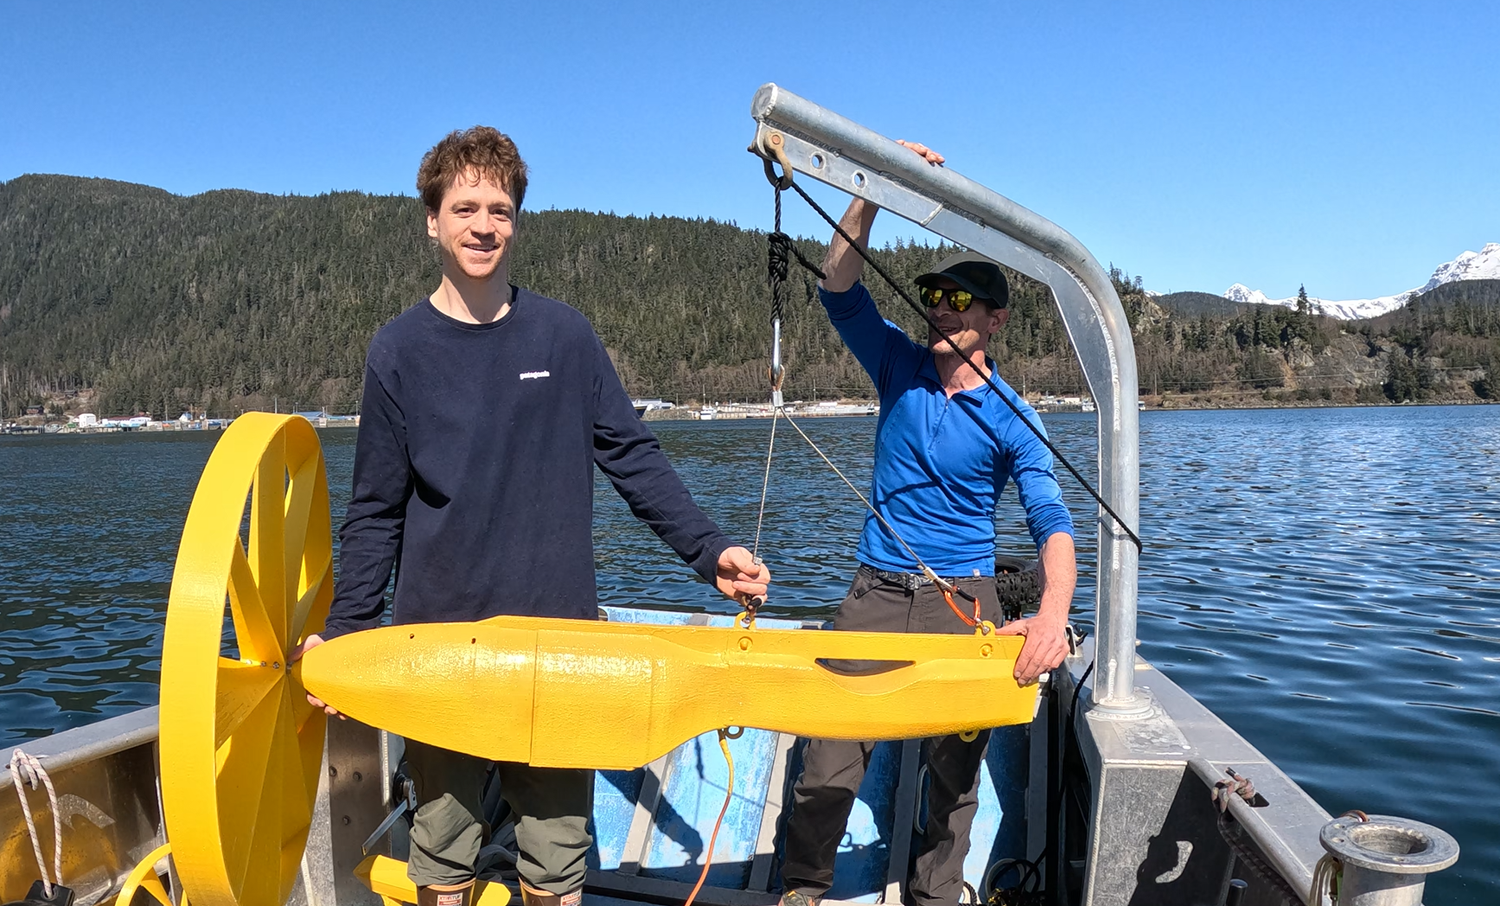 Alaskan hydroelectric technologies startup Sitkana has partnered with Sandia National Laboratories on a project that aims to use idle fishing vessels during Alaskan winters for tidal energy capture.